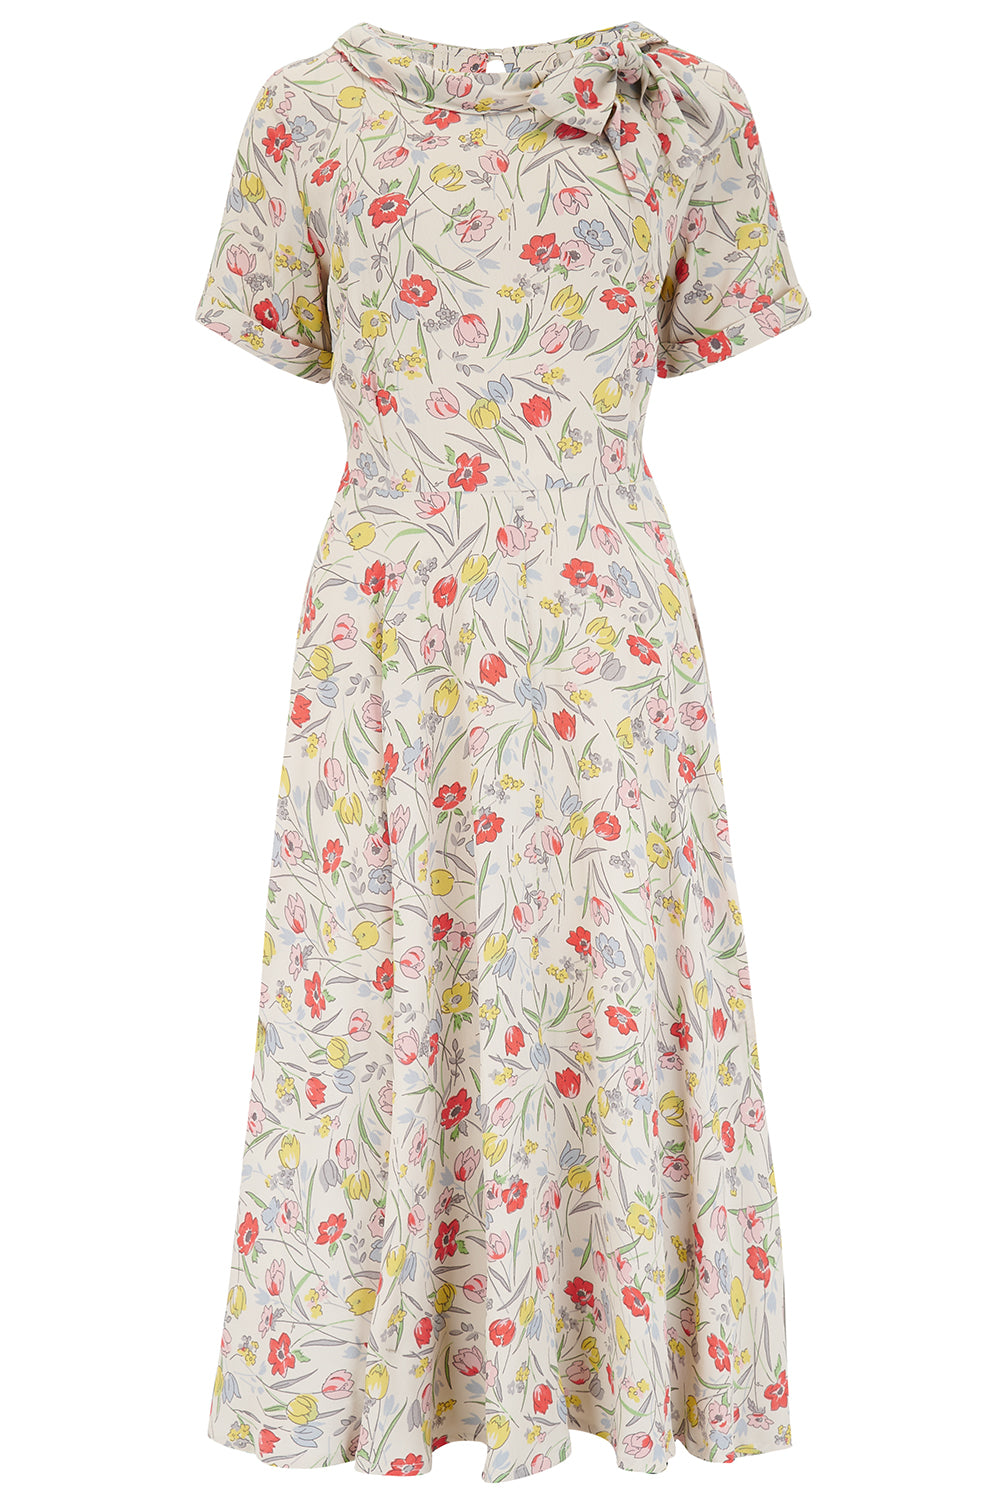 Cindy Dress in Poppy Print by The Seamstress Of Bloomsbury, Classic 1940s Vintage Inspired Style - True and authentic vintage style clothing, inspired by the Classic styles of CC41 , WW2 and the fun 1950s RocknRoll era, for everyday wear plus events like Goodwood Revival, Twinwood Festival and Viva Las Vegas Rockabilly Weekend Rock n Romance The Seamstress Of Bloomsbury